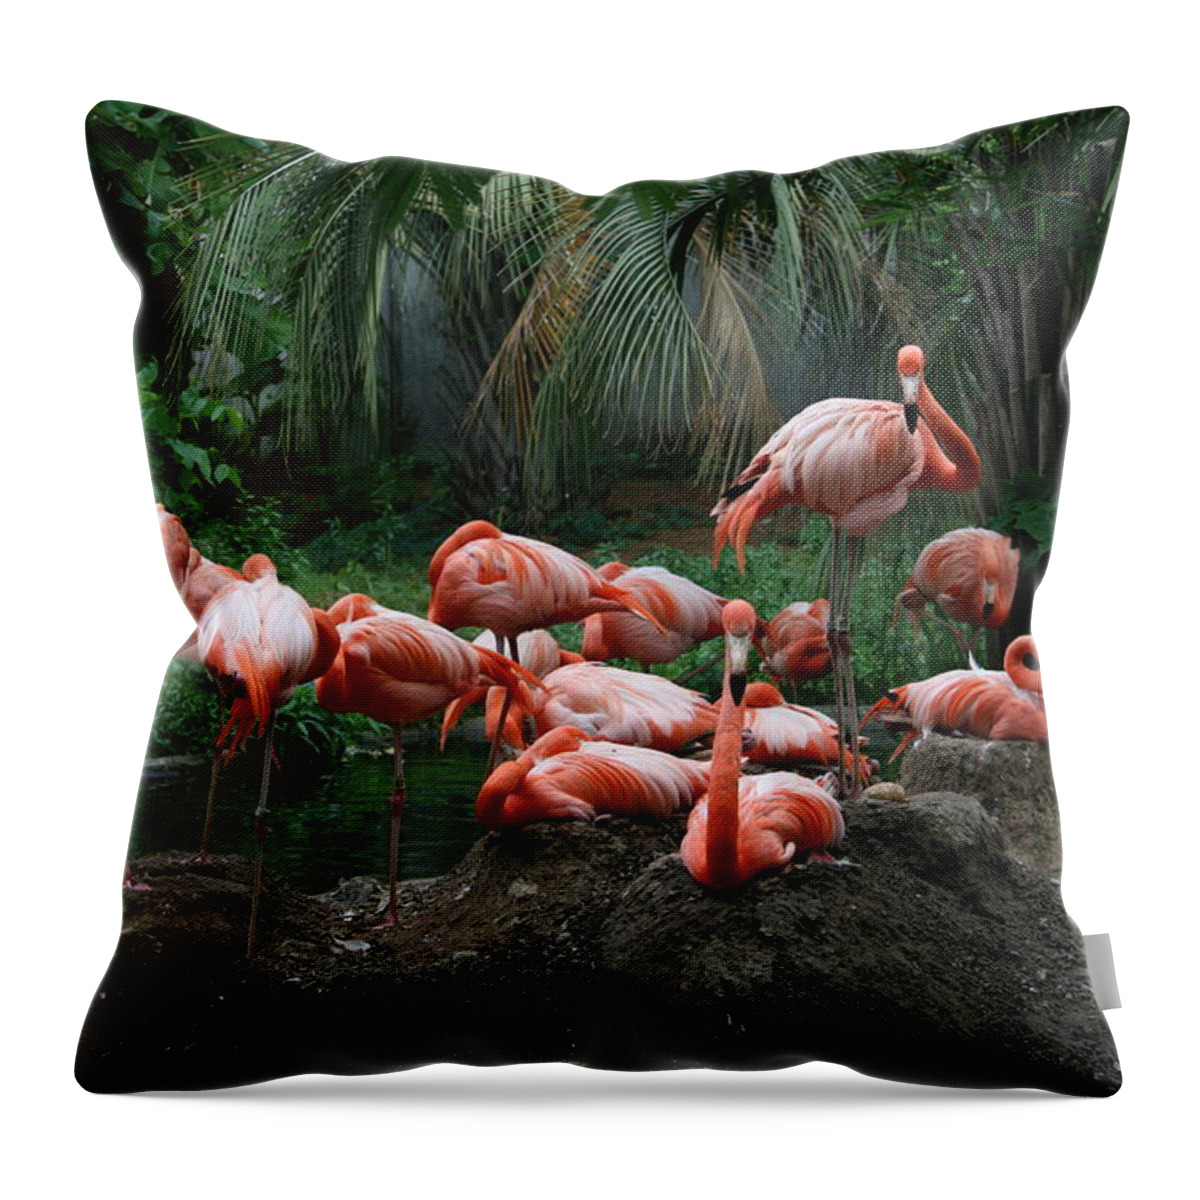 Orange Throw Pillow featuring the photograph Flamingos by Cathy Harper